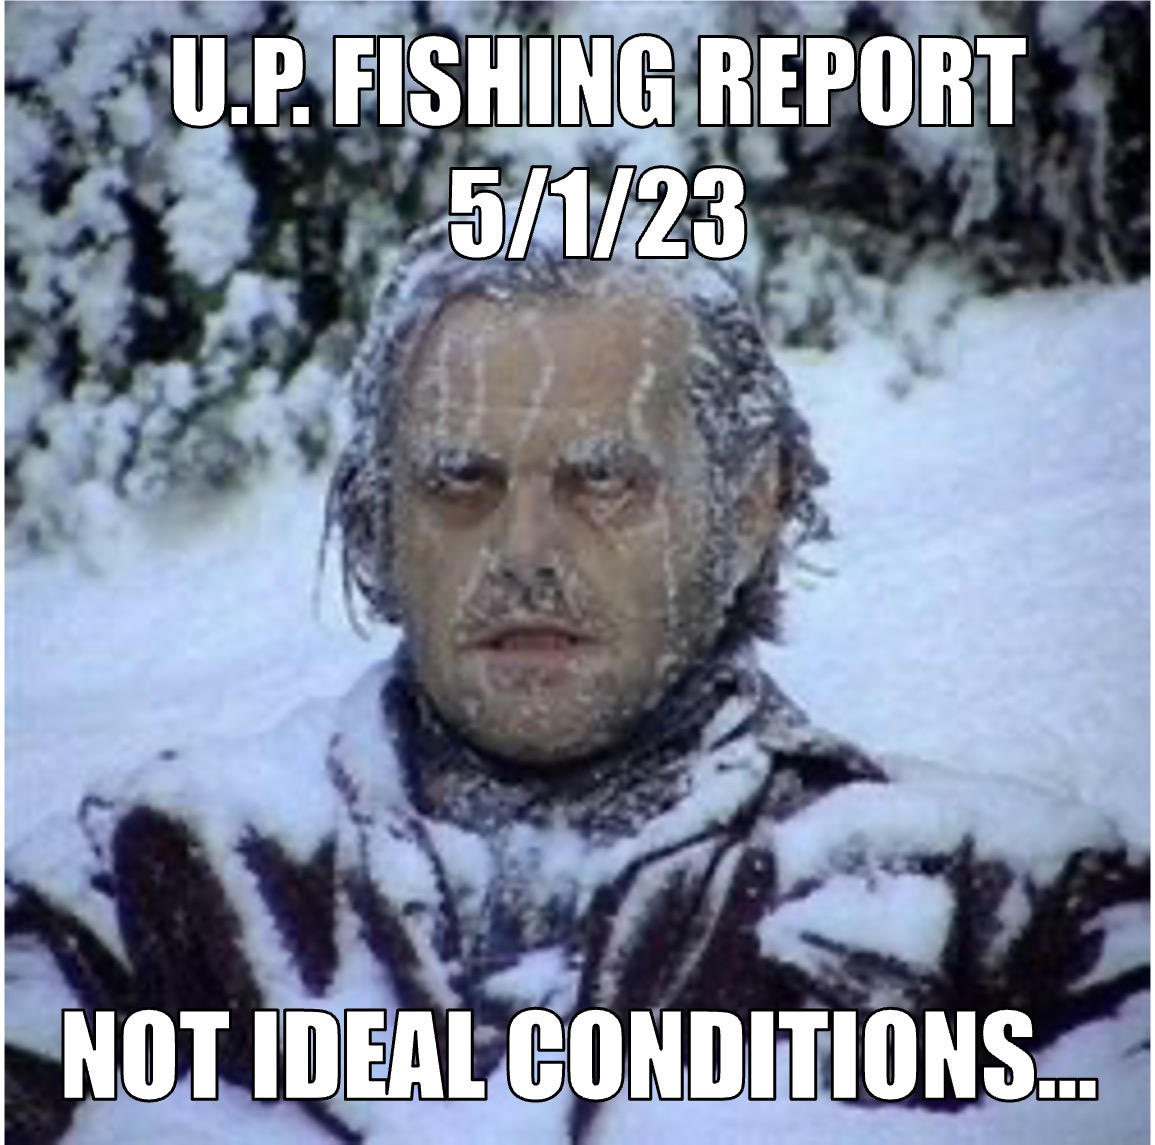 Special Edition of the U.P. Fishing Report for 5/1/23.   Hang on #yoopers, we're almost there!  #906wx #miwx #upperpeninsula #puremichigan #lakesuperior #lakemichigan #lakehuron #marquettemi #Weather #fishingreport #fishinglife #fishing